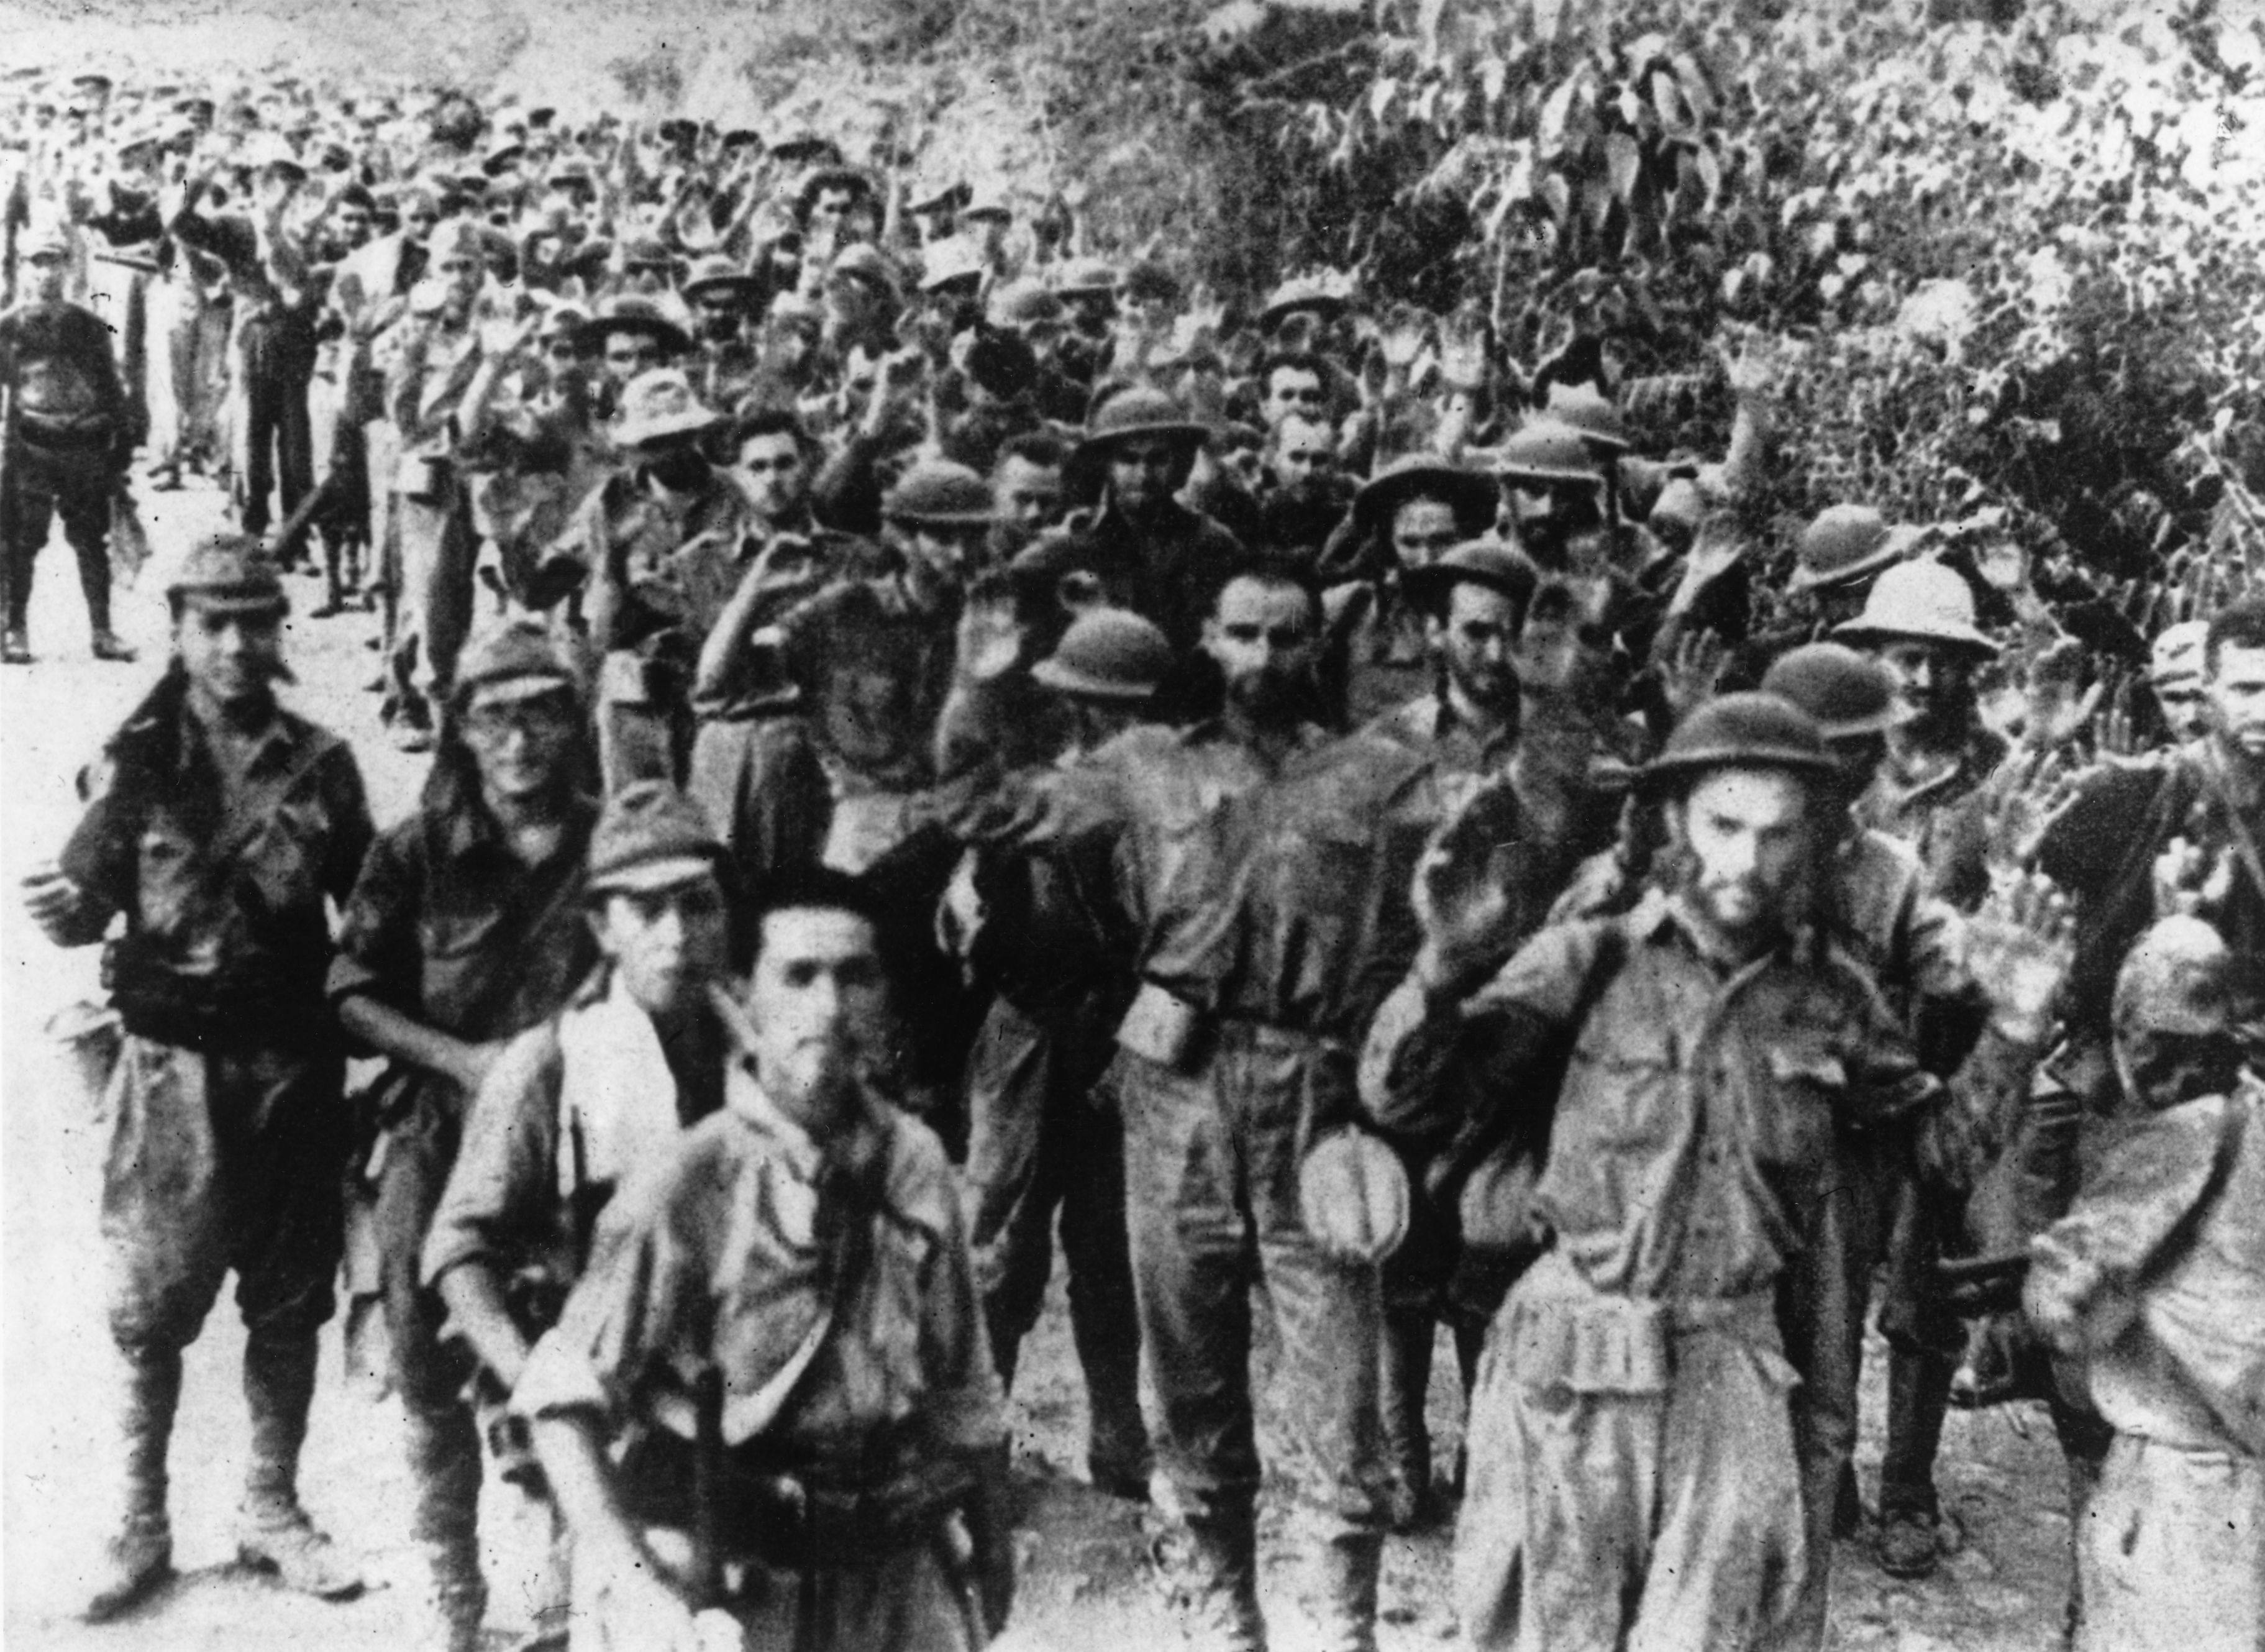 Allied soldiers captured by the Japanese during the Battle of Java in World War II. Photo: Getty Images